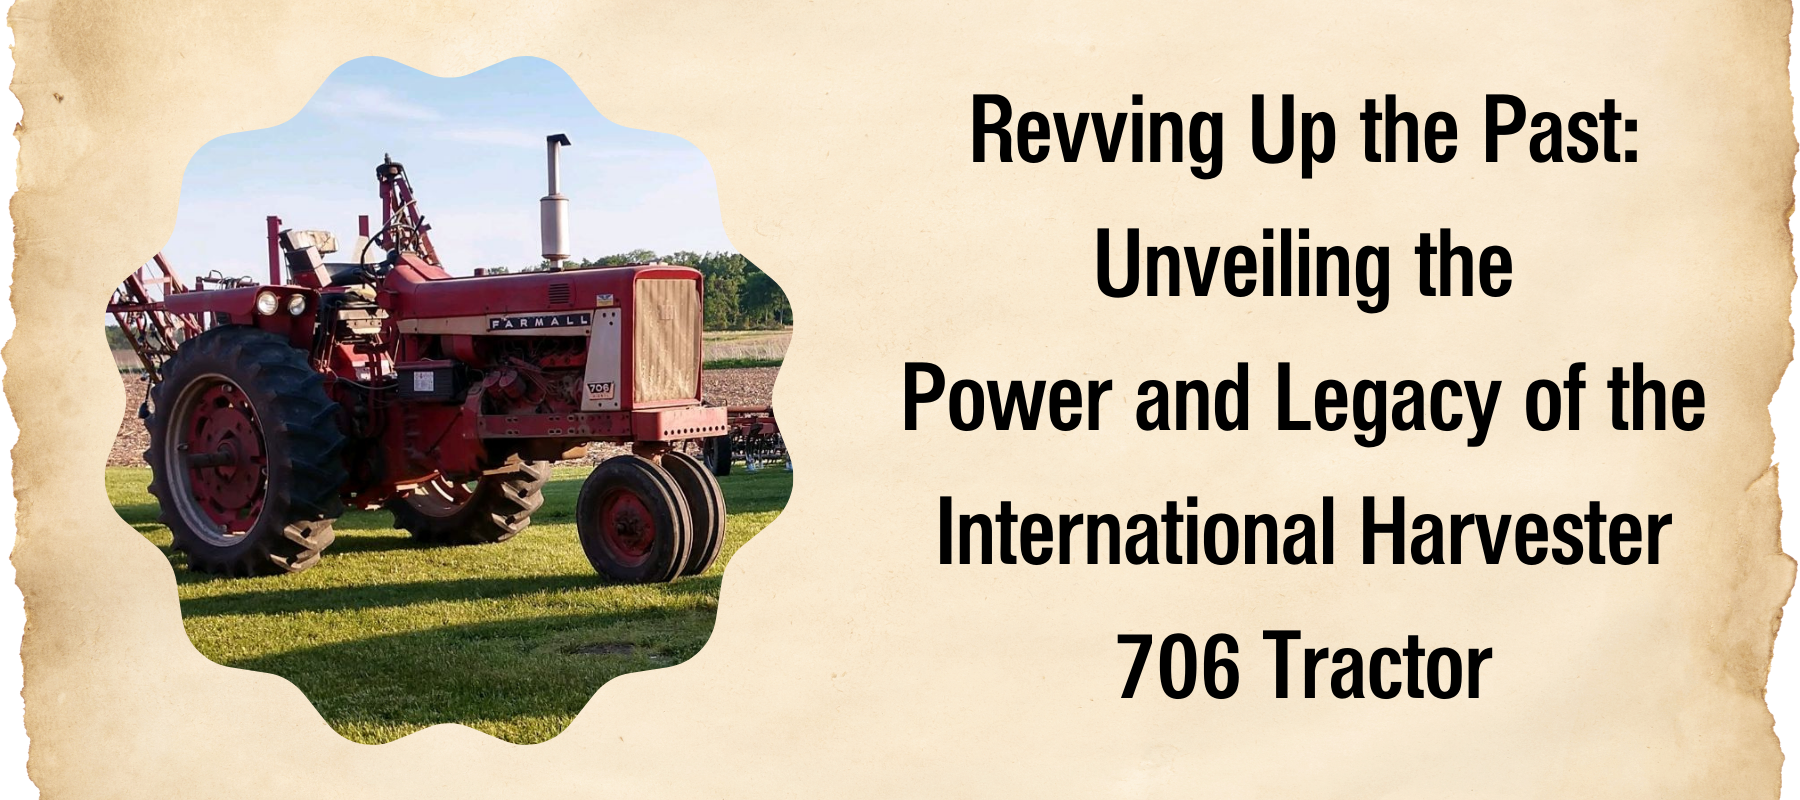 Revving Up the Past: Unveiling the Power and Legacy of the International Harvester 706 Tractor